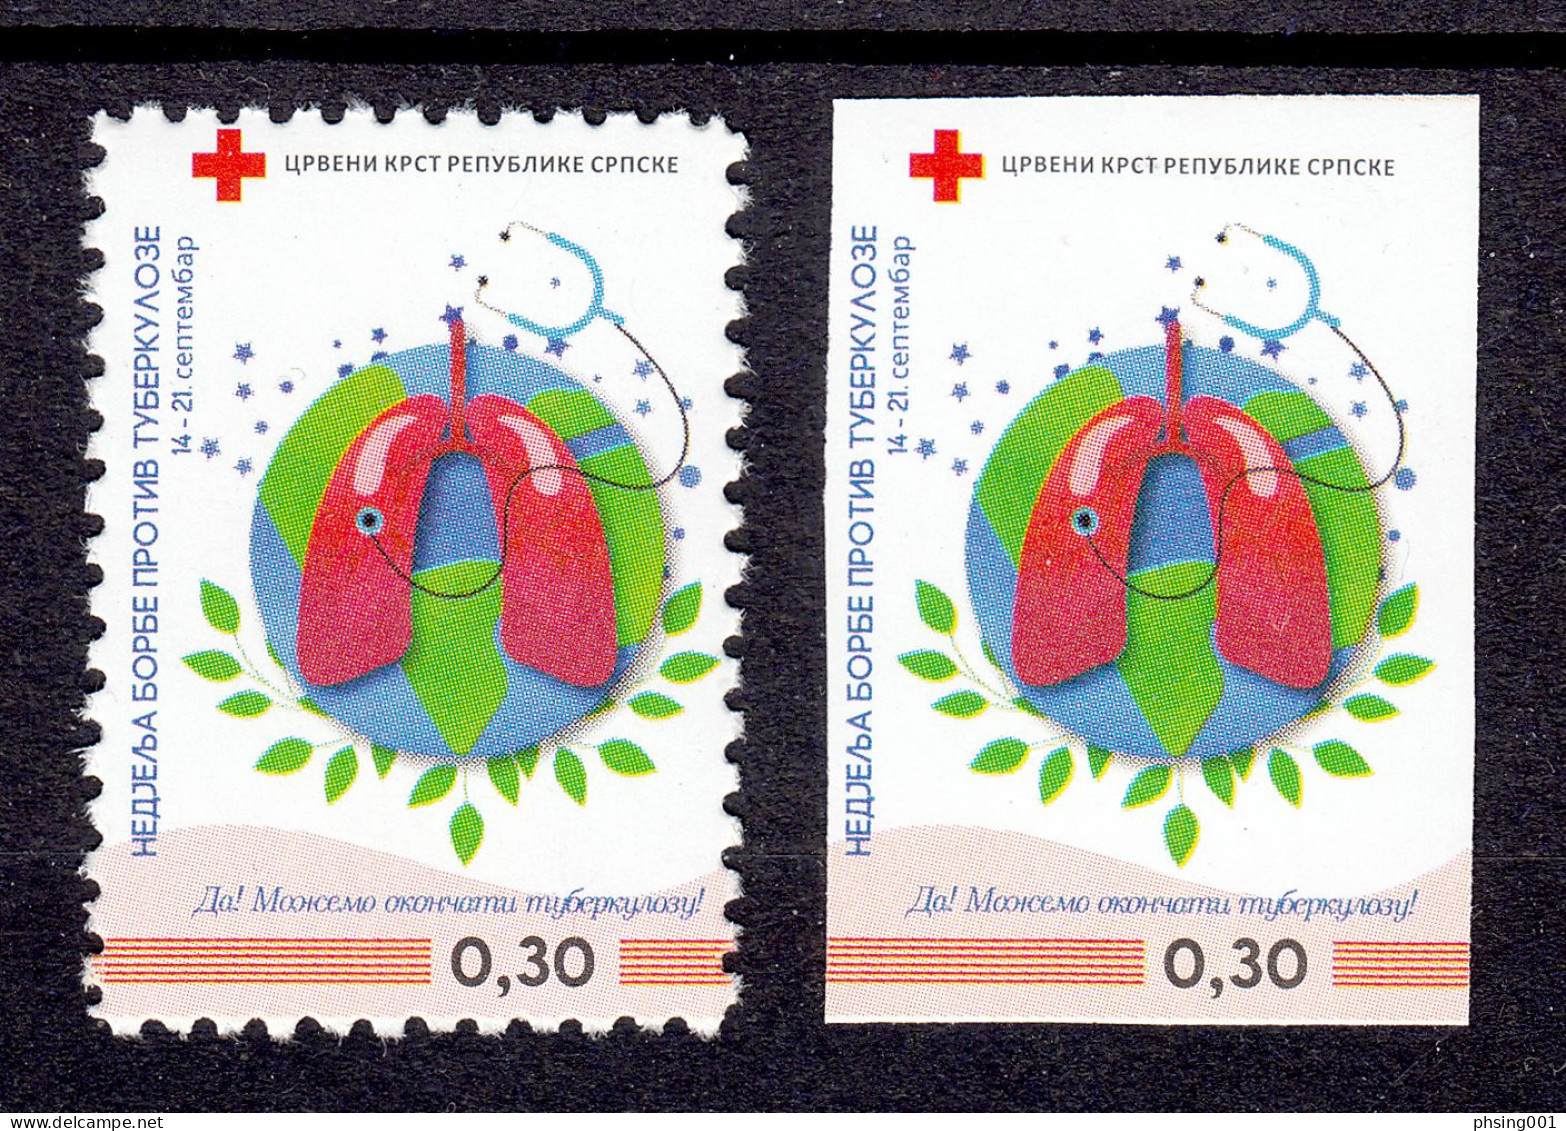 Bosnia Serbia 2023 TBC Red Cross Croix Rouge Rotes Kreuz Tax Charity Surcharge Perforated+imperforated Stamp MNH - Croce Rossa